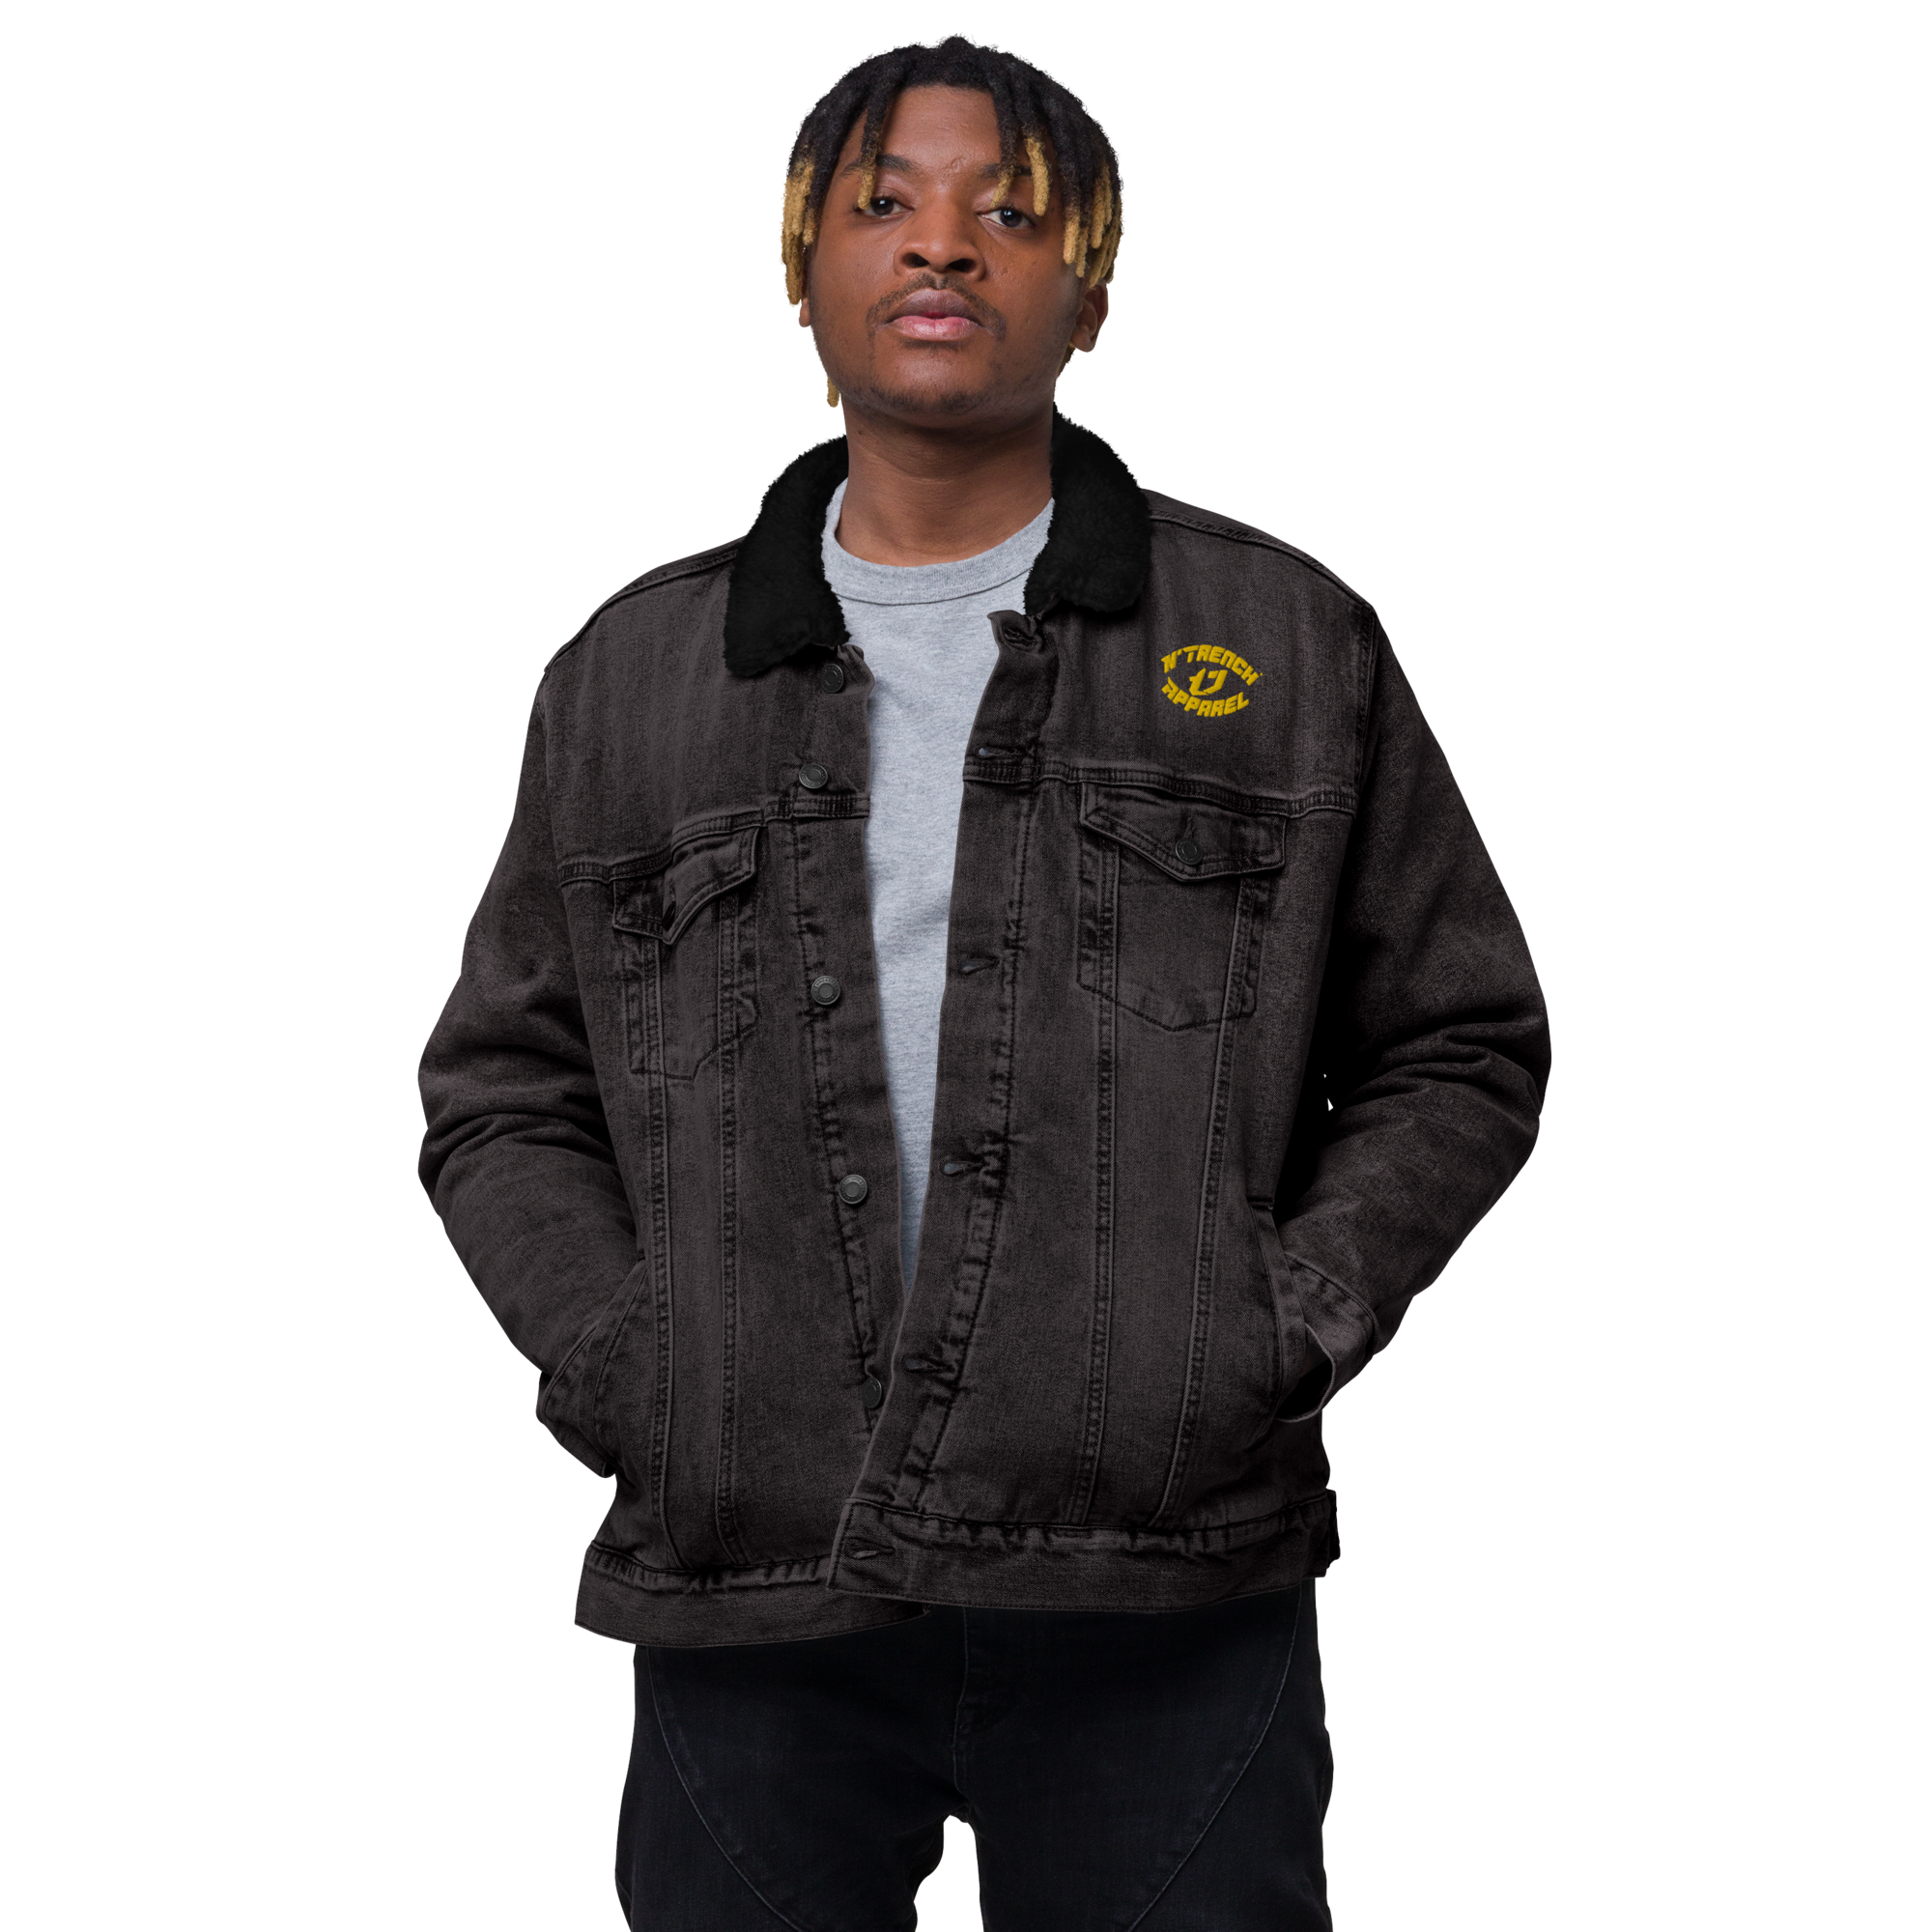 N'Trench Apparel Gold Lettering And Logo Men/Guys Embroidery denim sherpa jacket